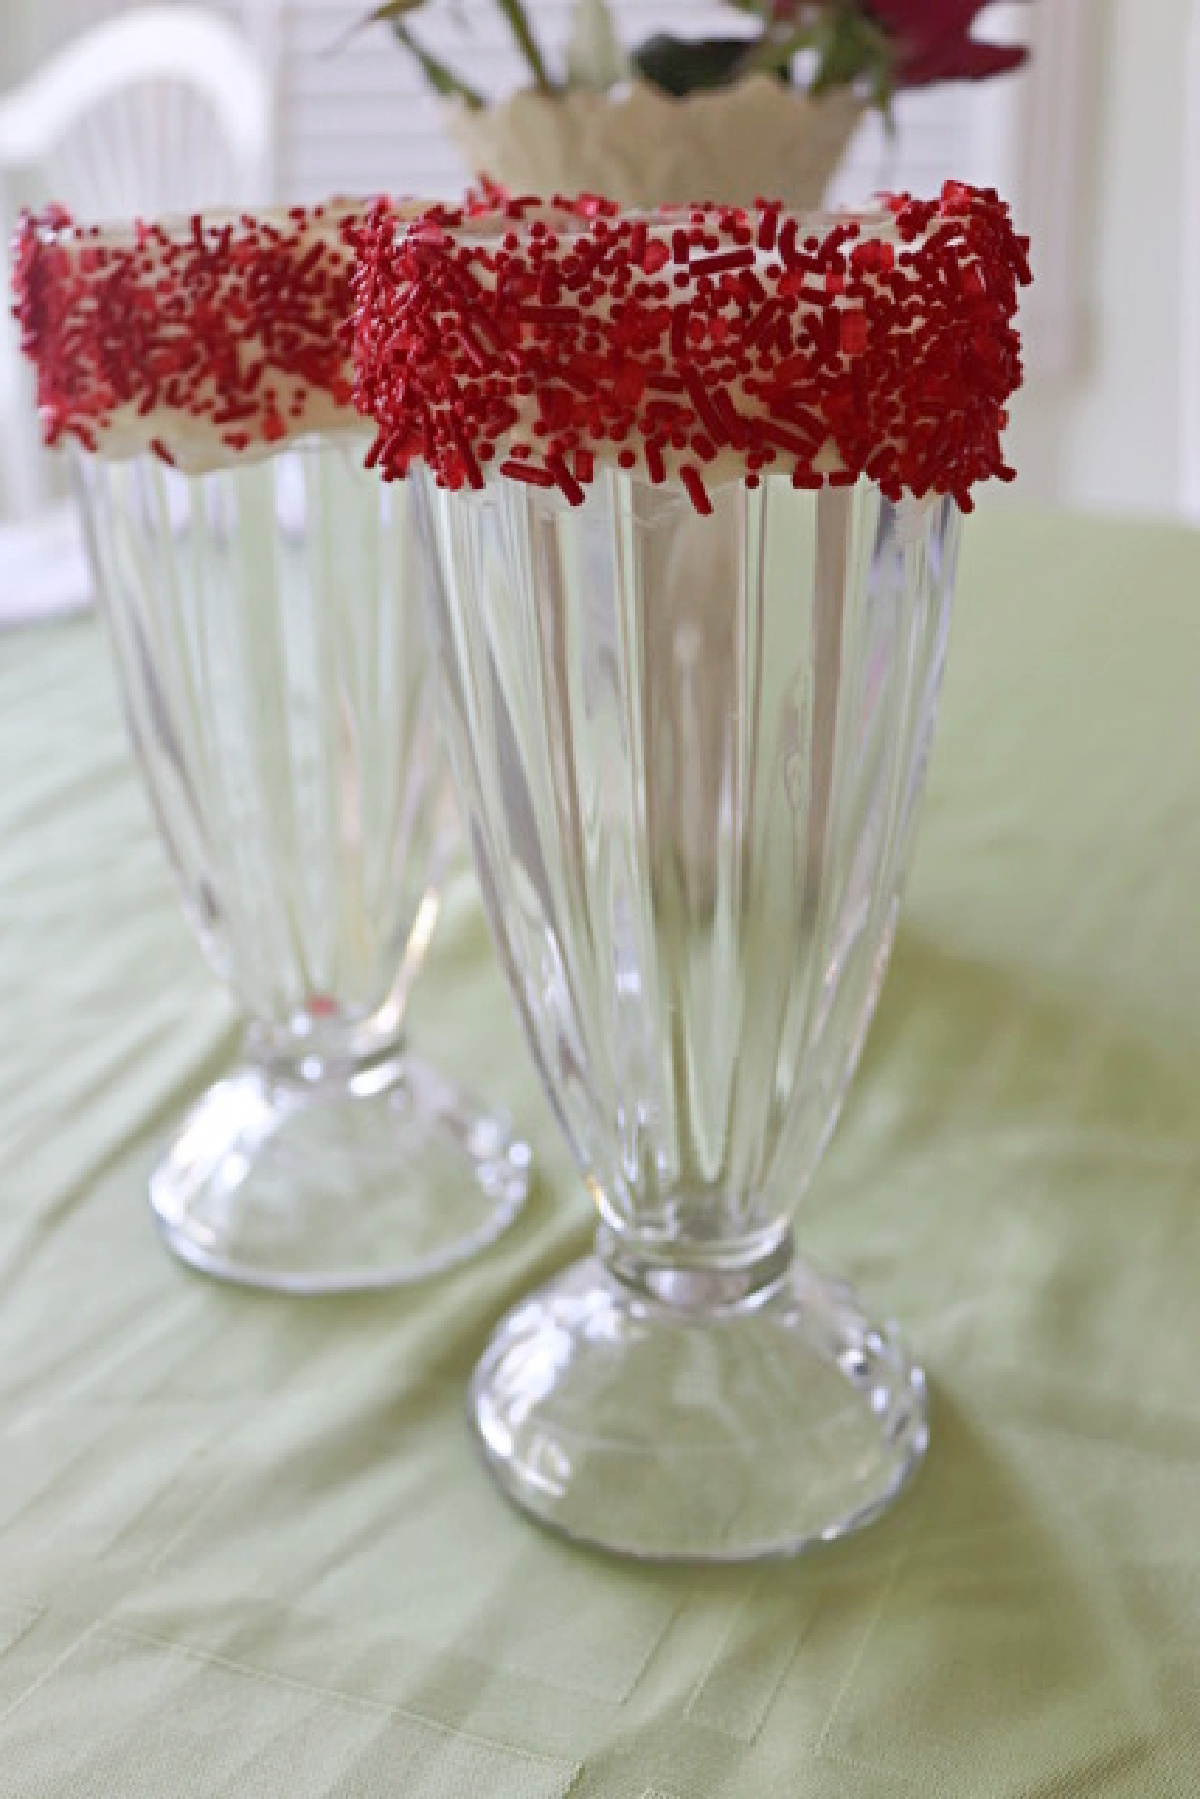 Two empty milkshake glasses decorated with white chocolate and red sprinkles.